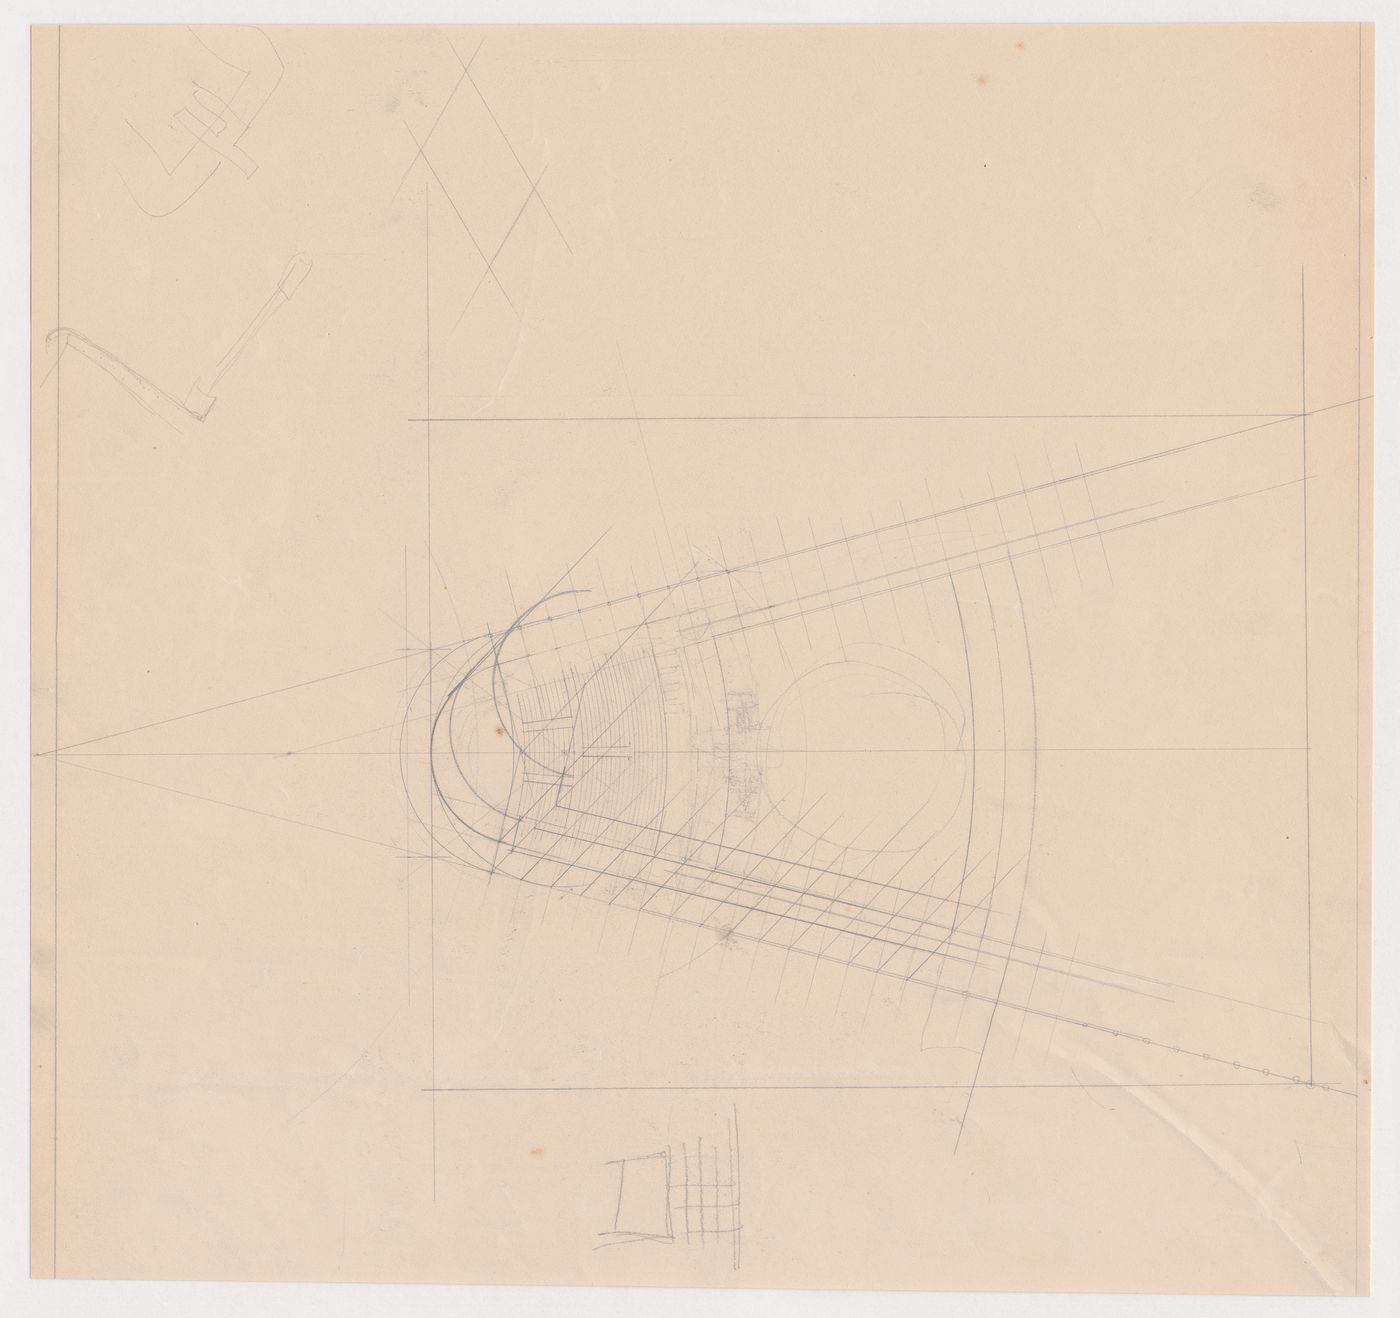 Plan oblique for the 1926 design for People's University, Rotterdam, Netherlands